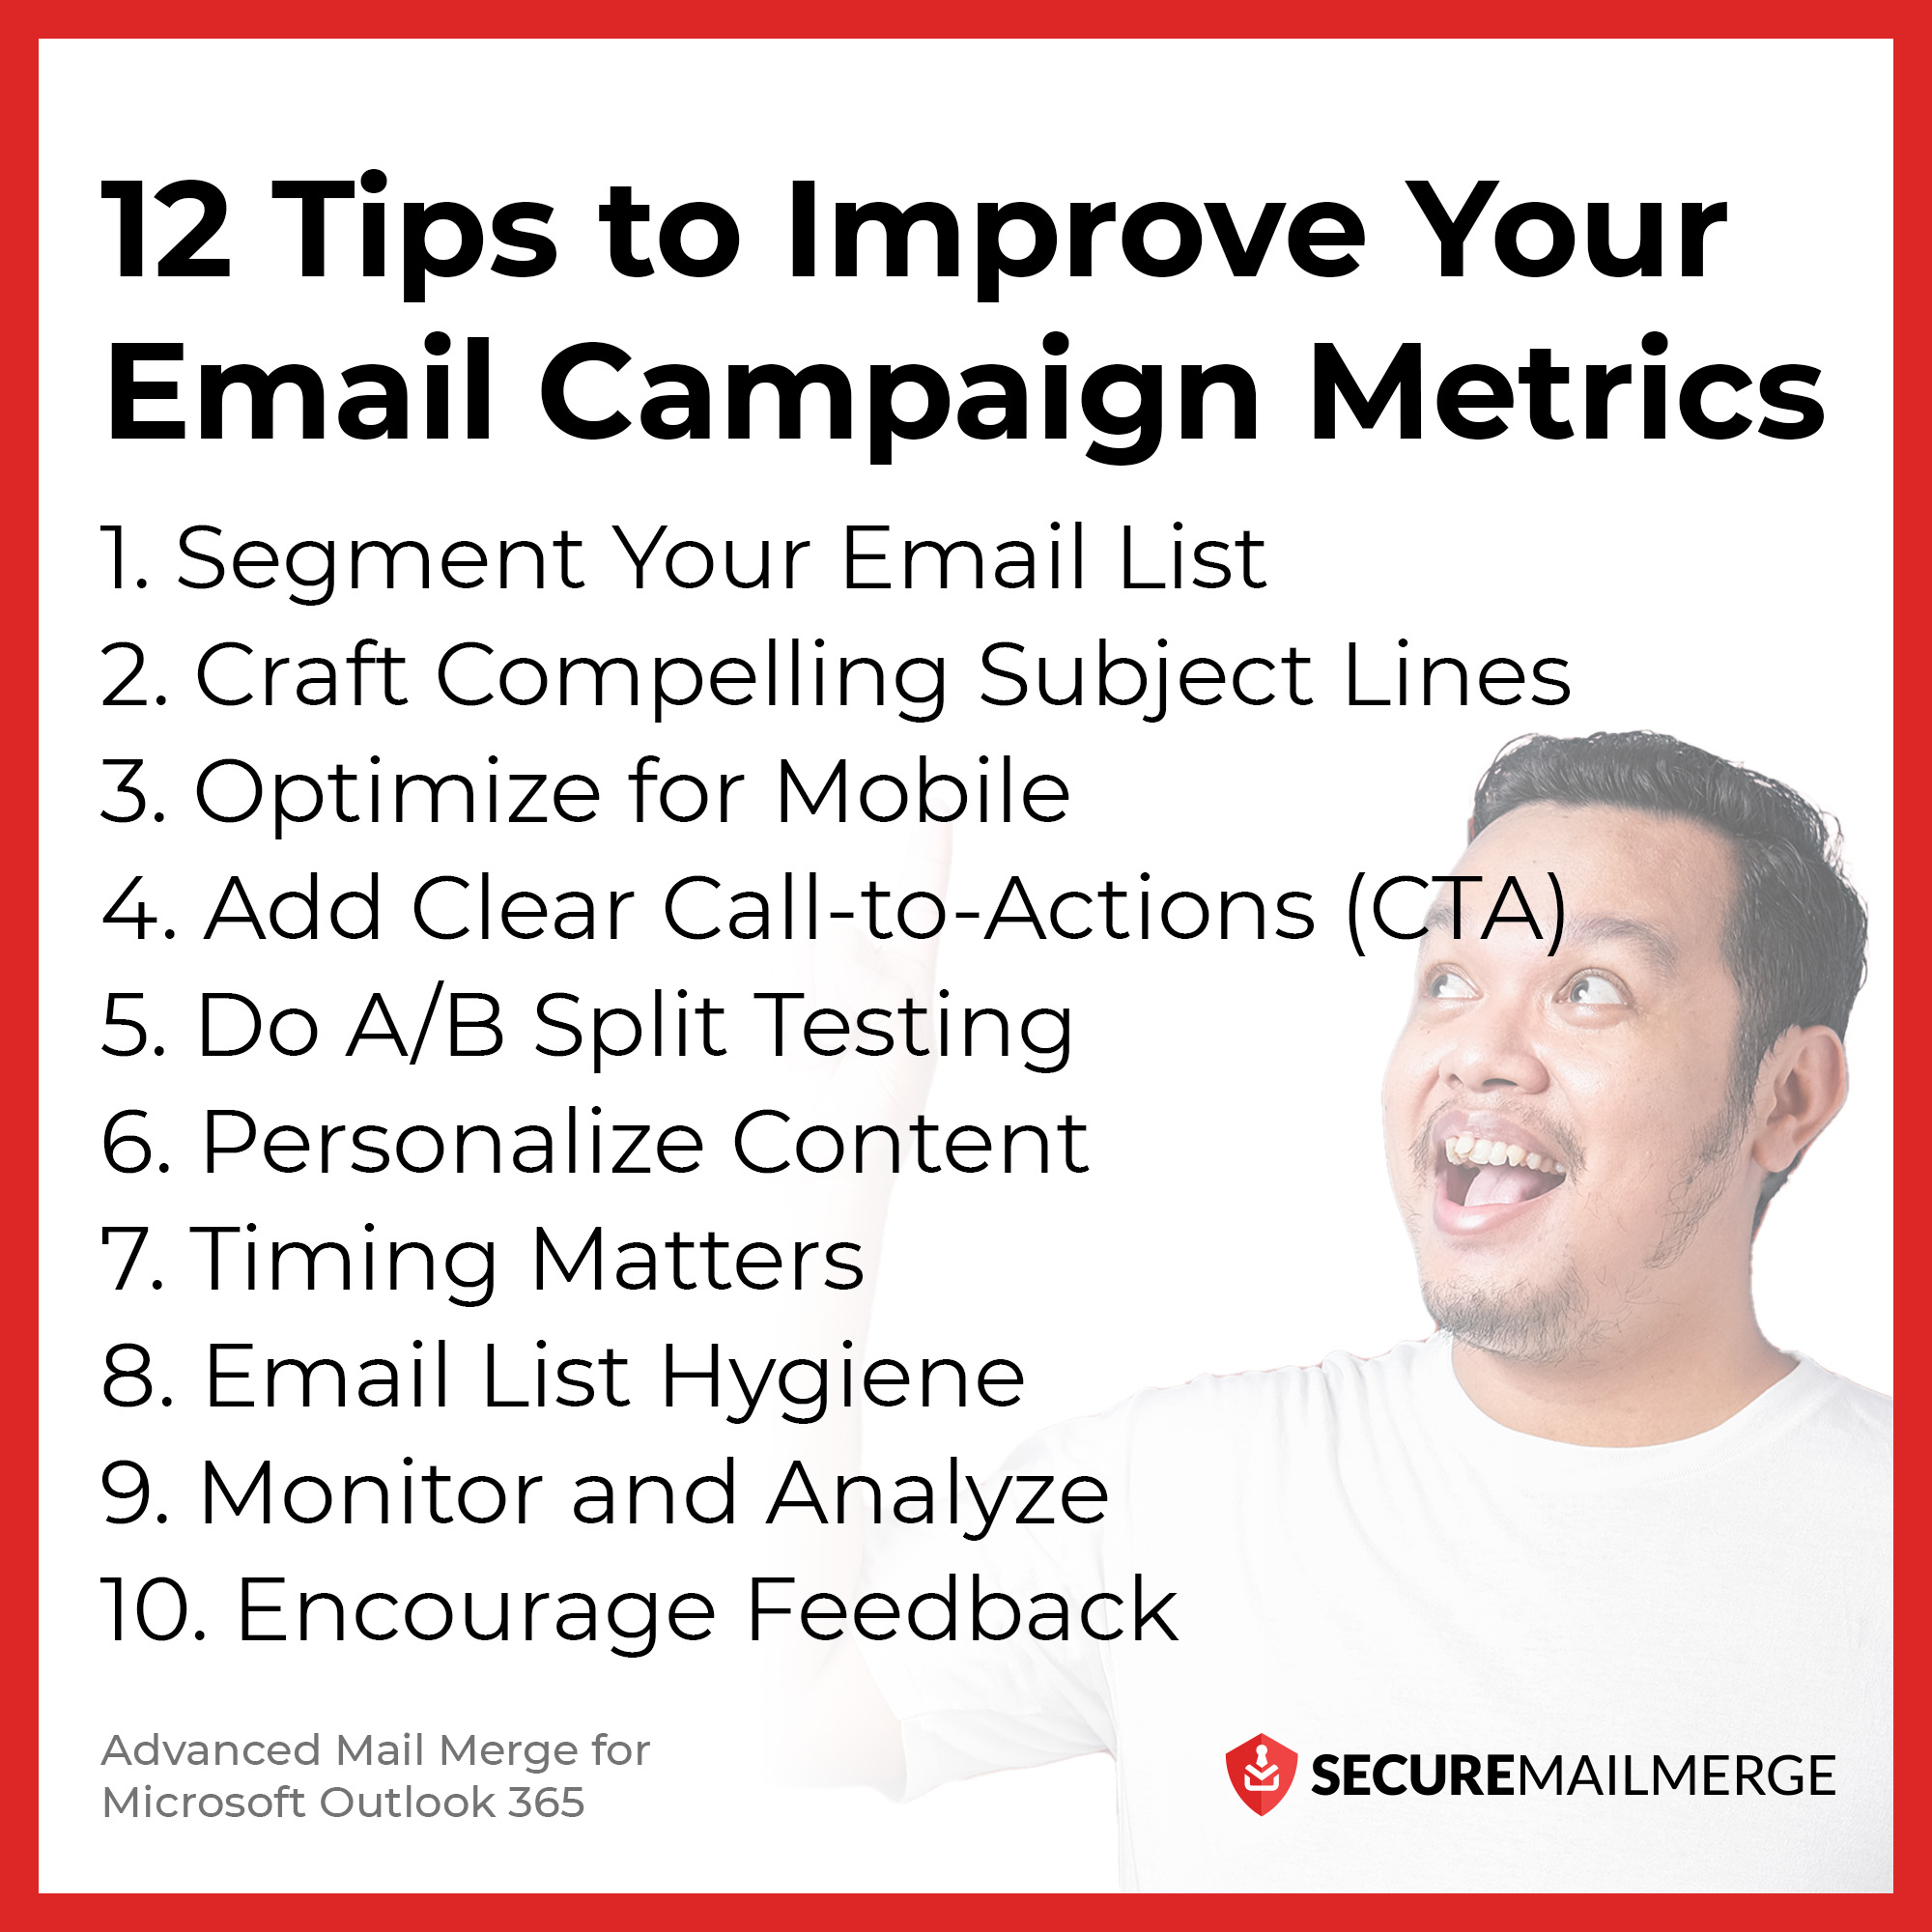 12 Tips to Improve Your Email Campaign Metrics